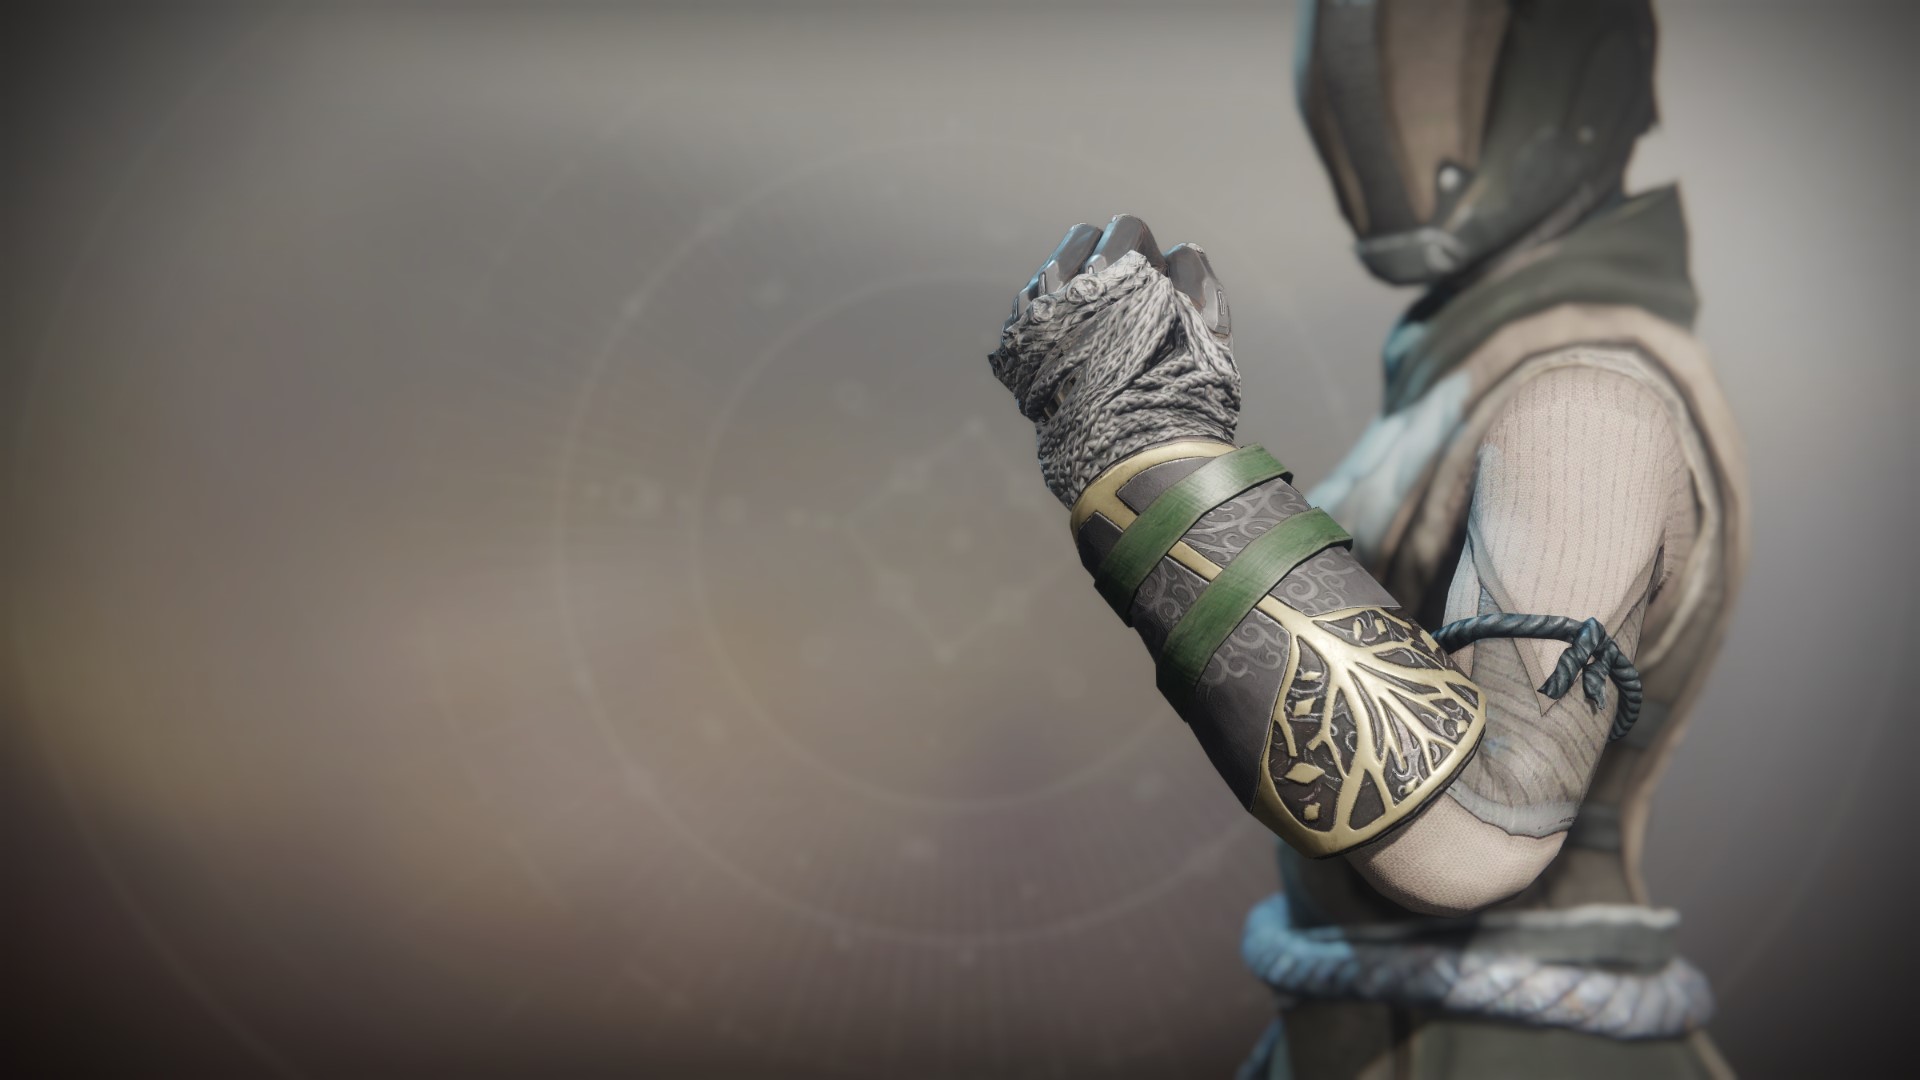 An in-game render of the Iron Truage Gloves.